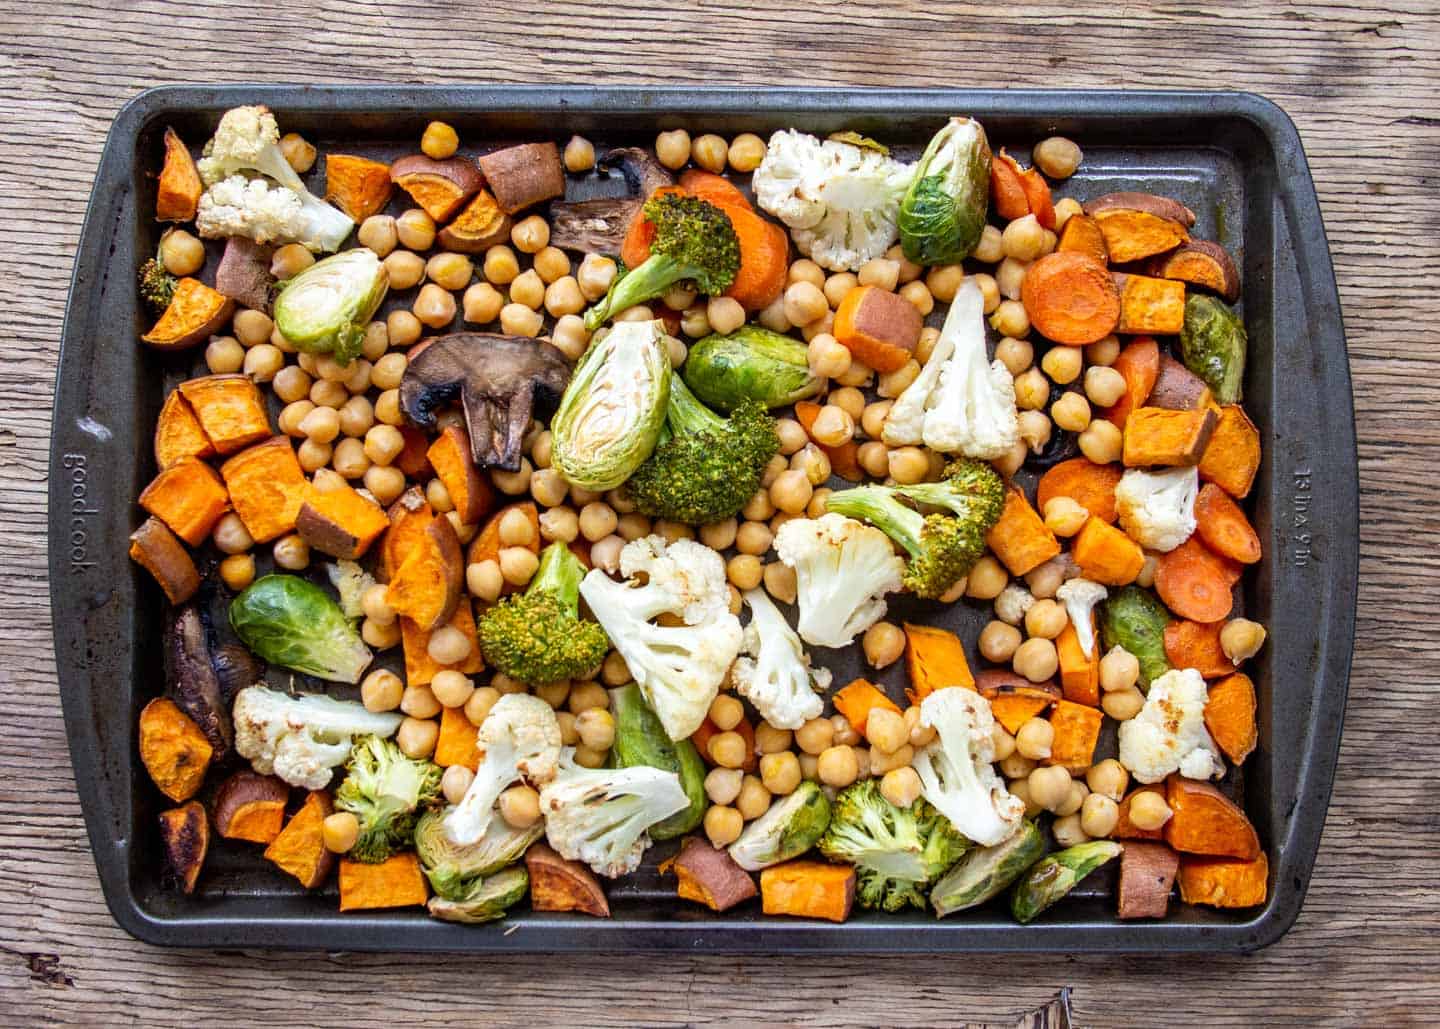 Roasted vegetables and chickpeas on baking tray